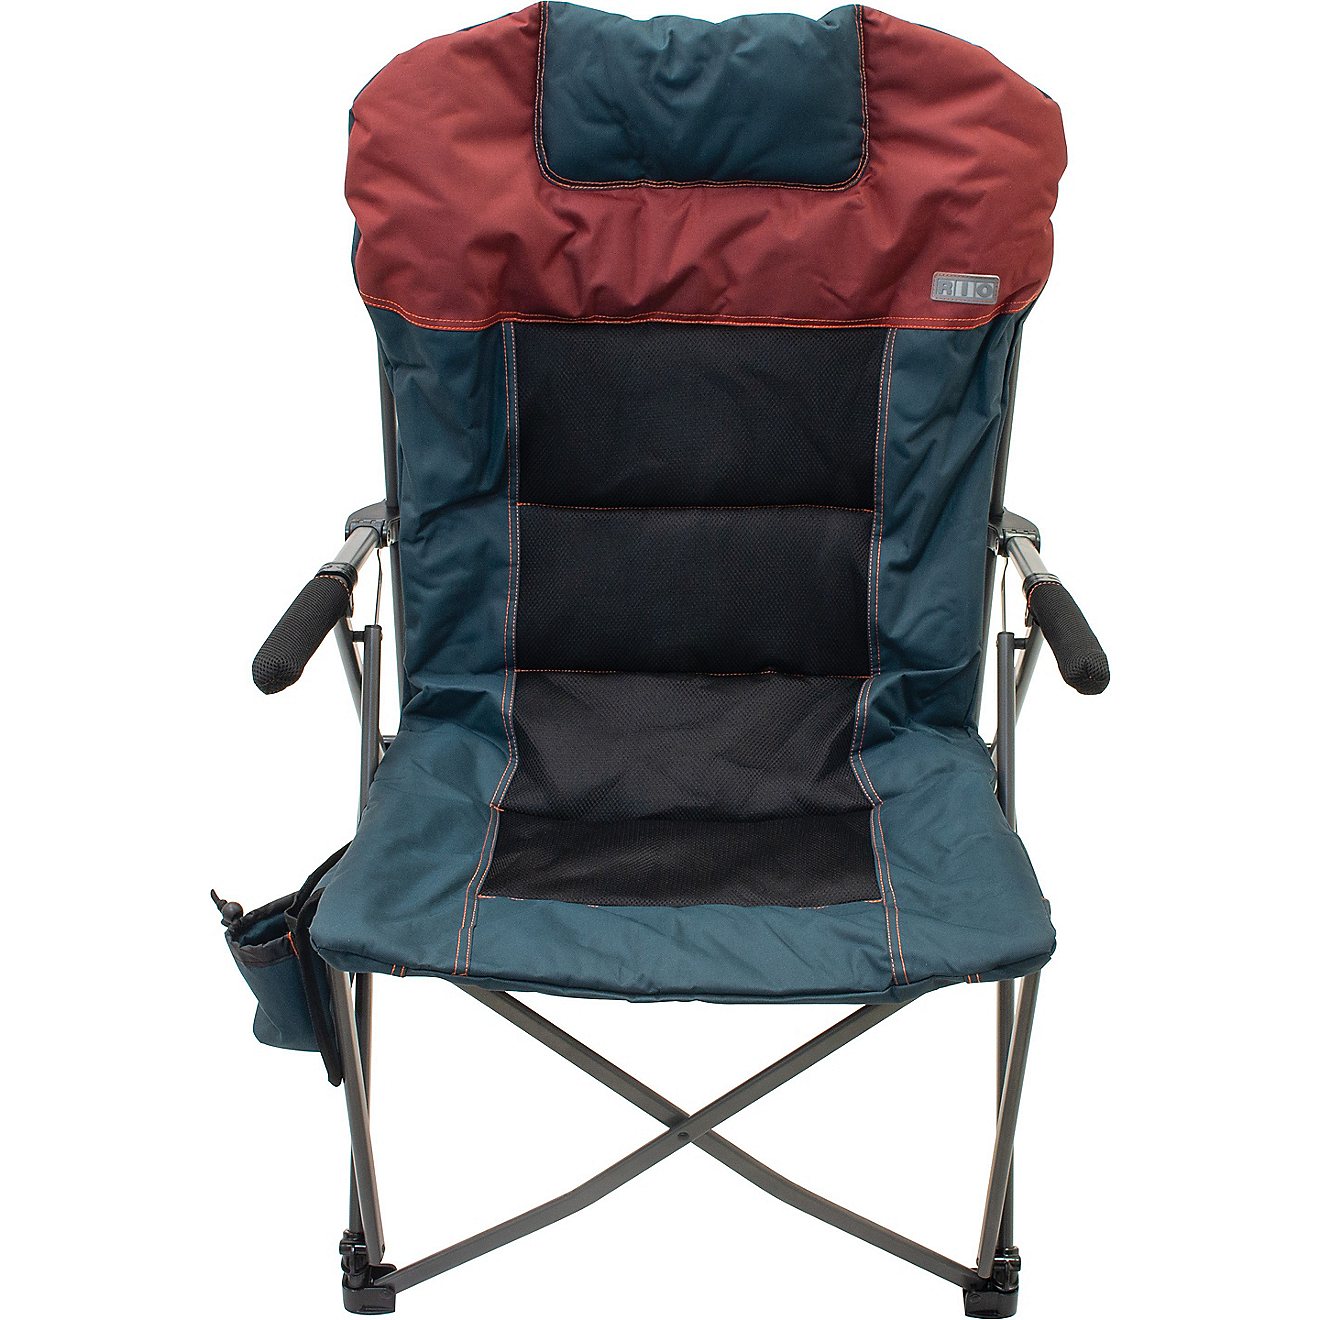 Rio Deluxe Hard Arm Quad Chair                                                                                                   - view number 5